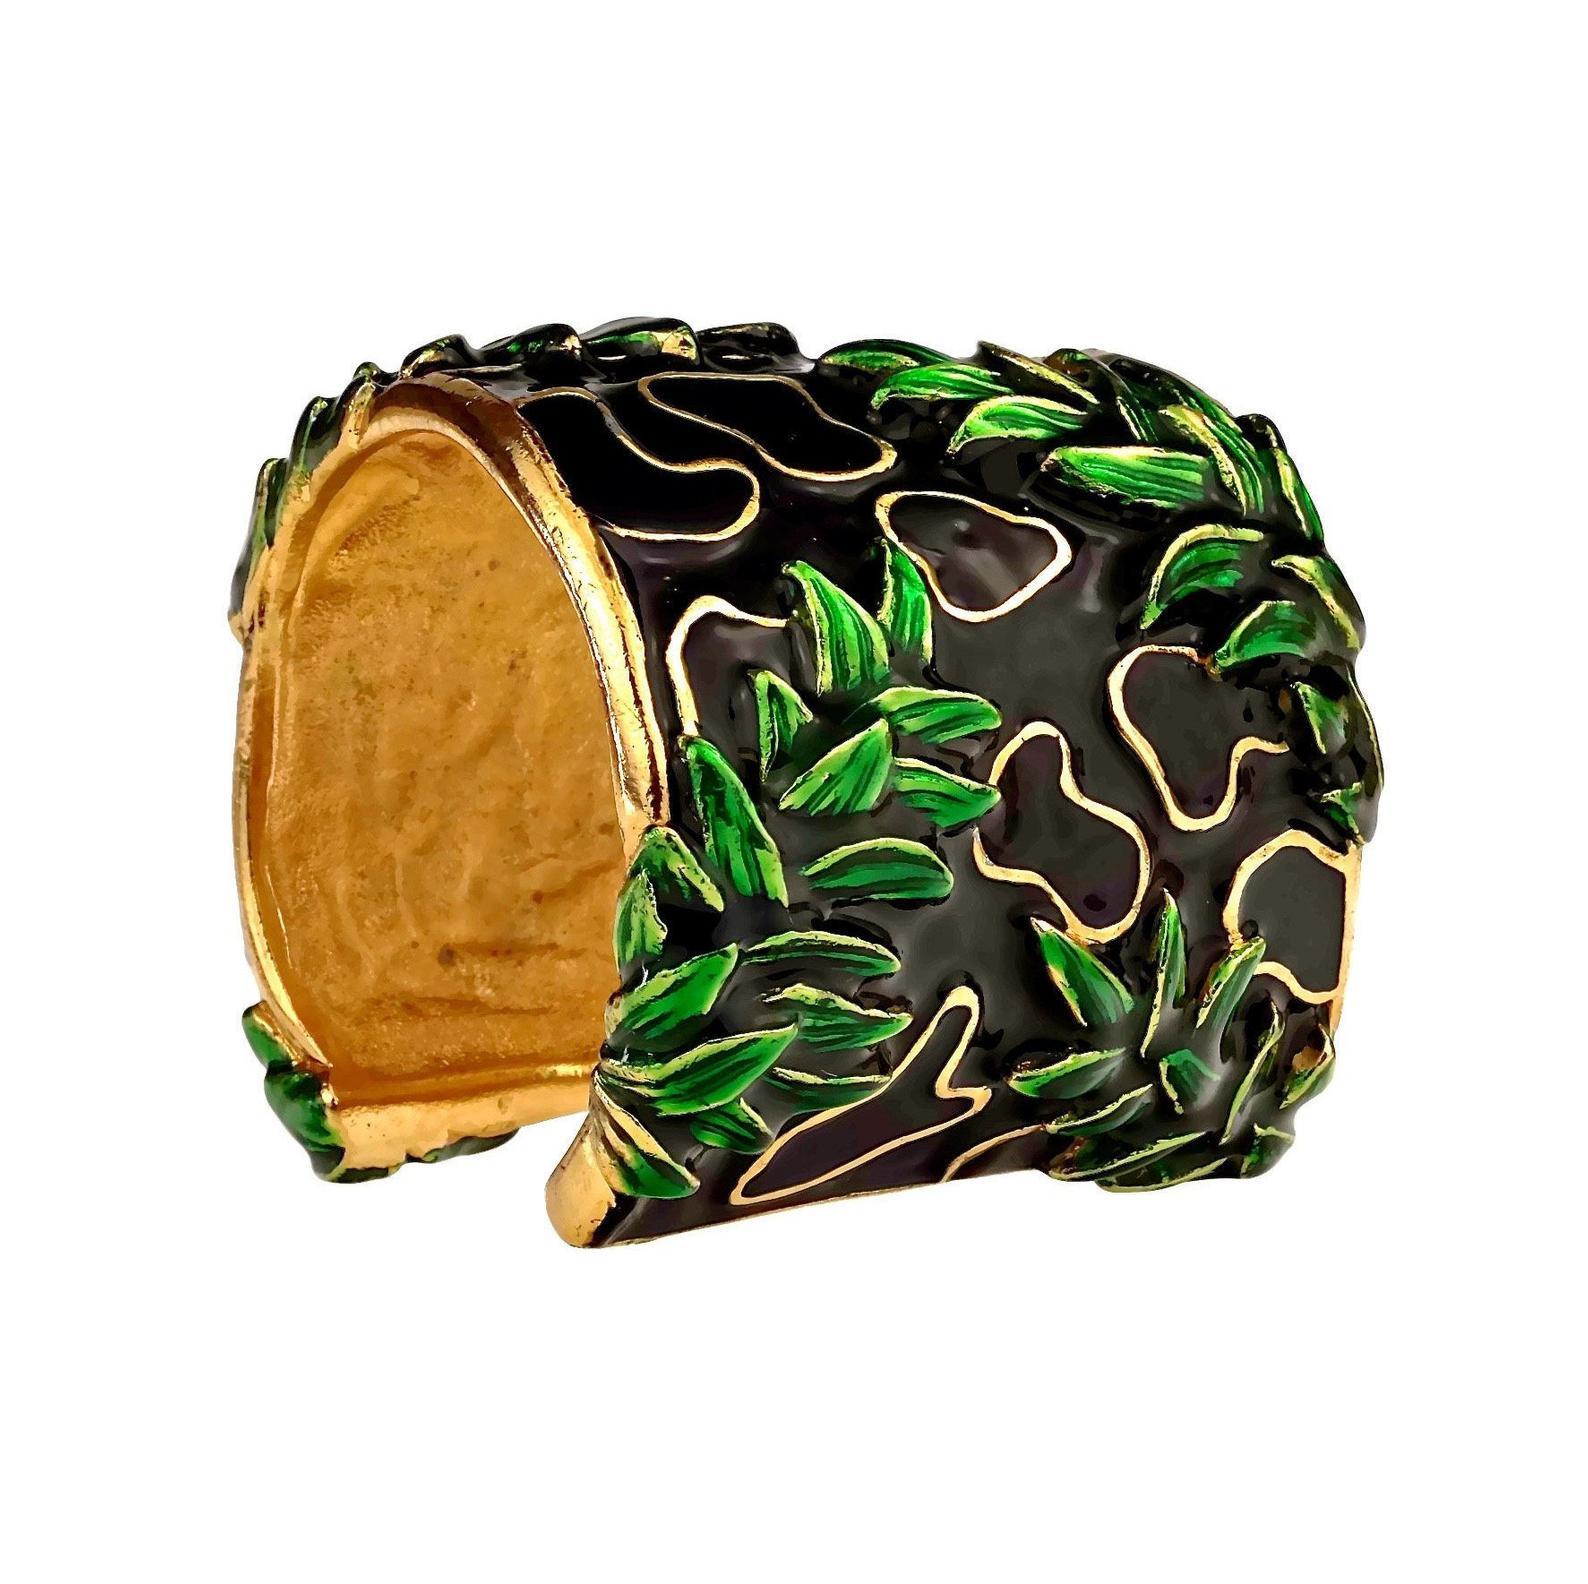 Vintage CHRISTIAN DIOR BOUTIQUE Embossed Leaf Pattern Enamel Cuff Bracelet

Measurements:
Height: 2.55 inches (6.5 cm)
Inner Circumference: 6.81 inches (17.3 cm)

Features:
- 100% Authentic CHRISTIAN DIOR BOUTIQUE.
- Wide cuff in black, green and